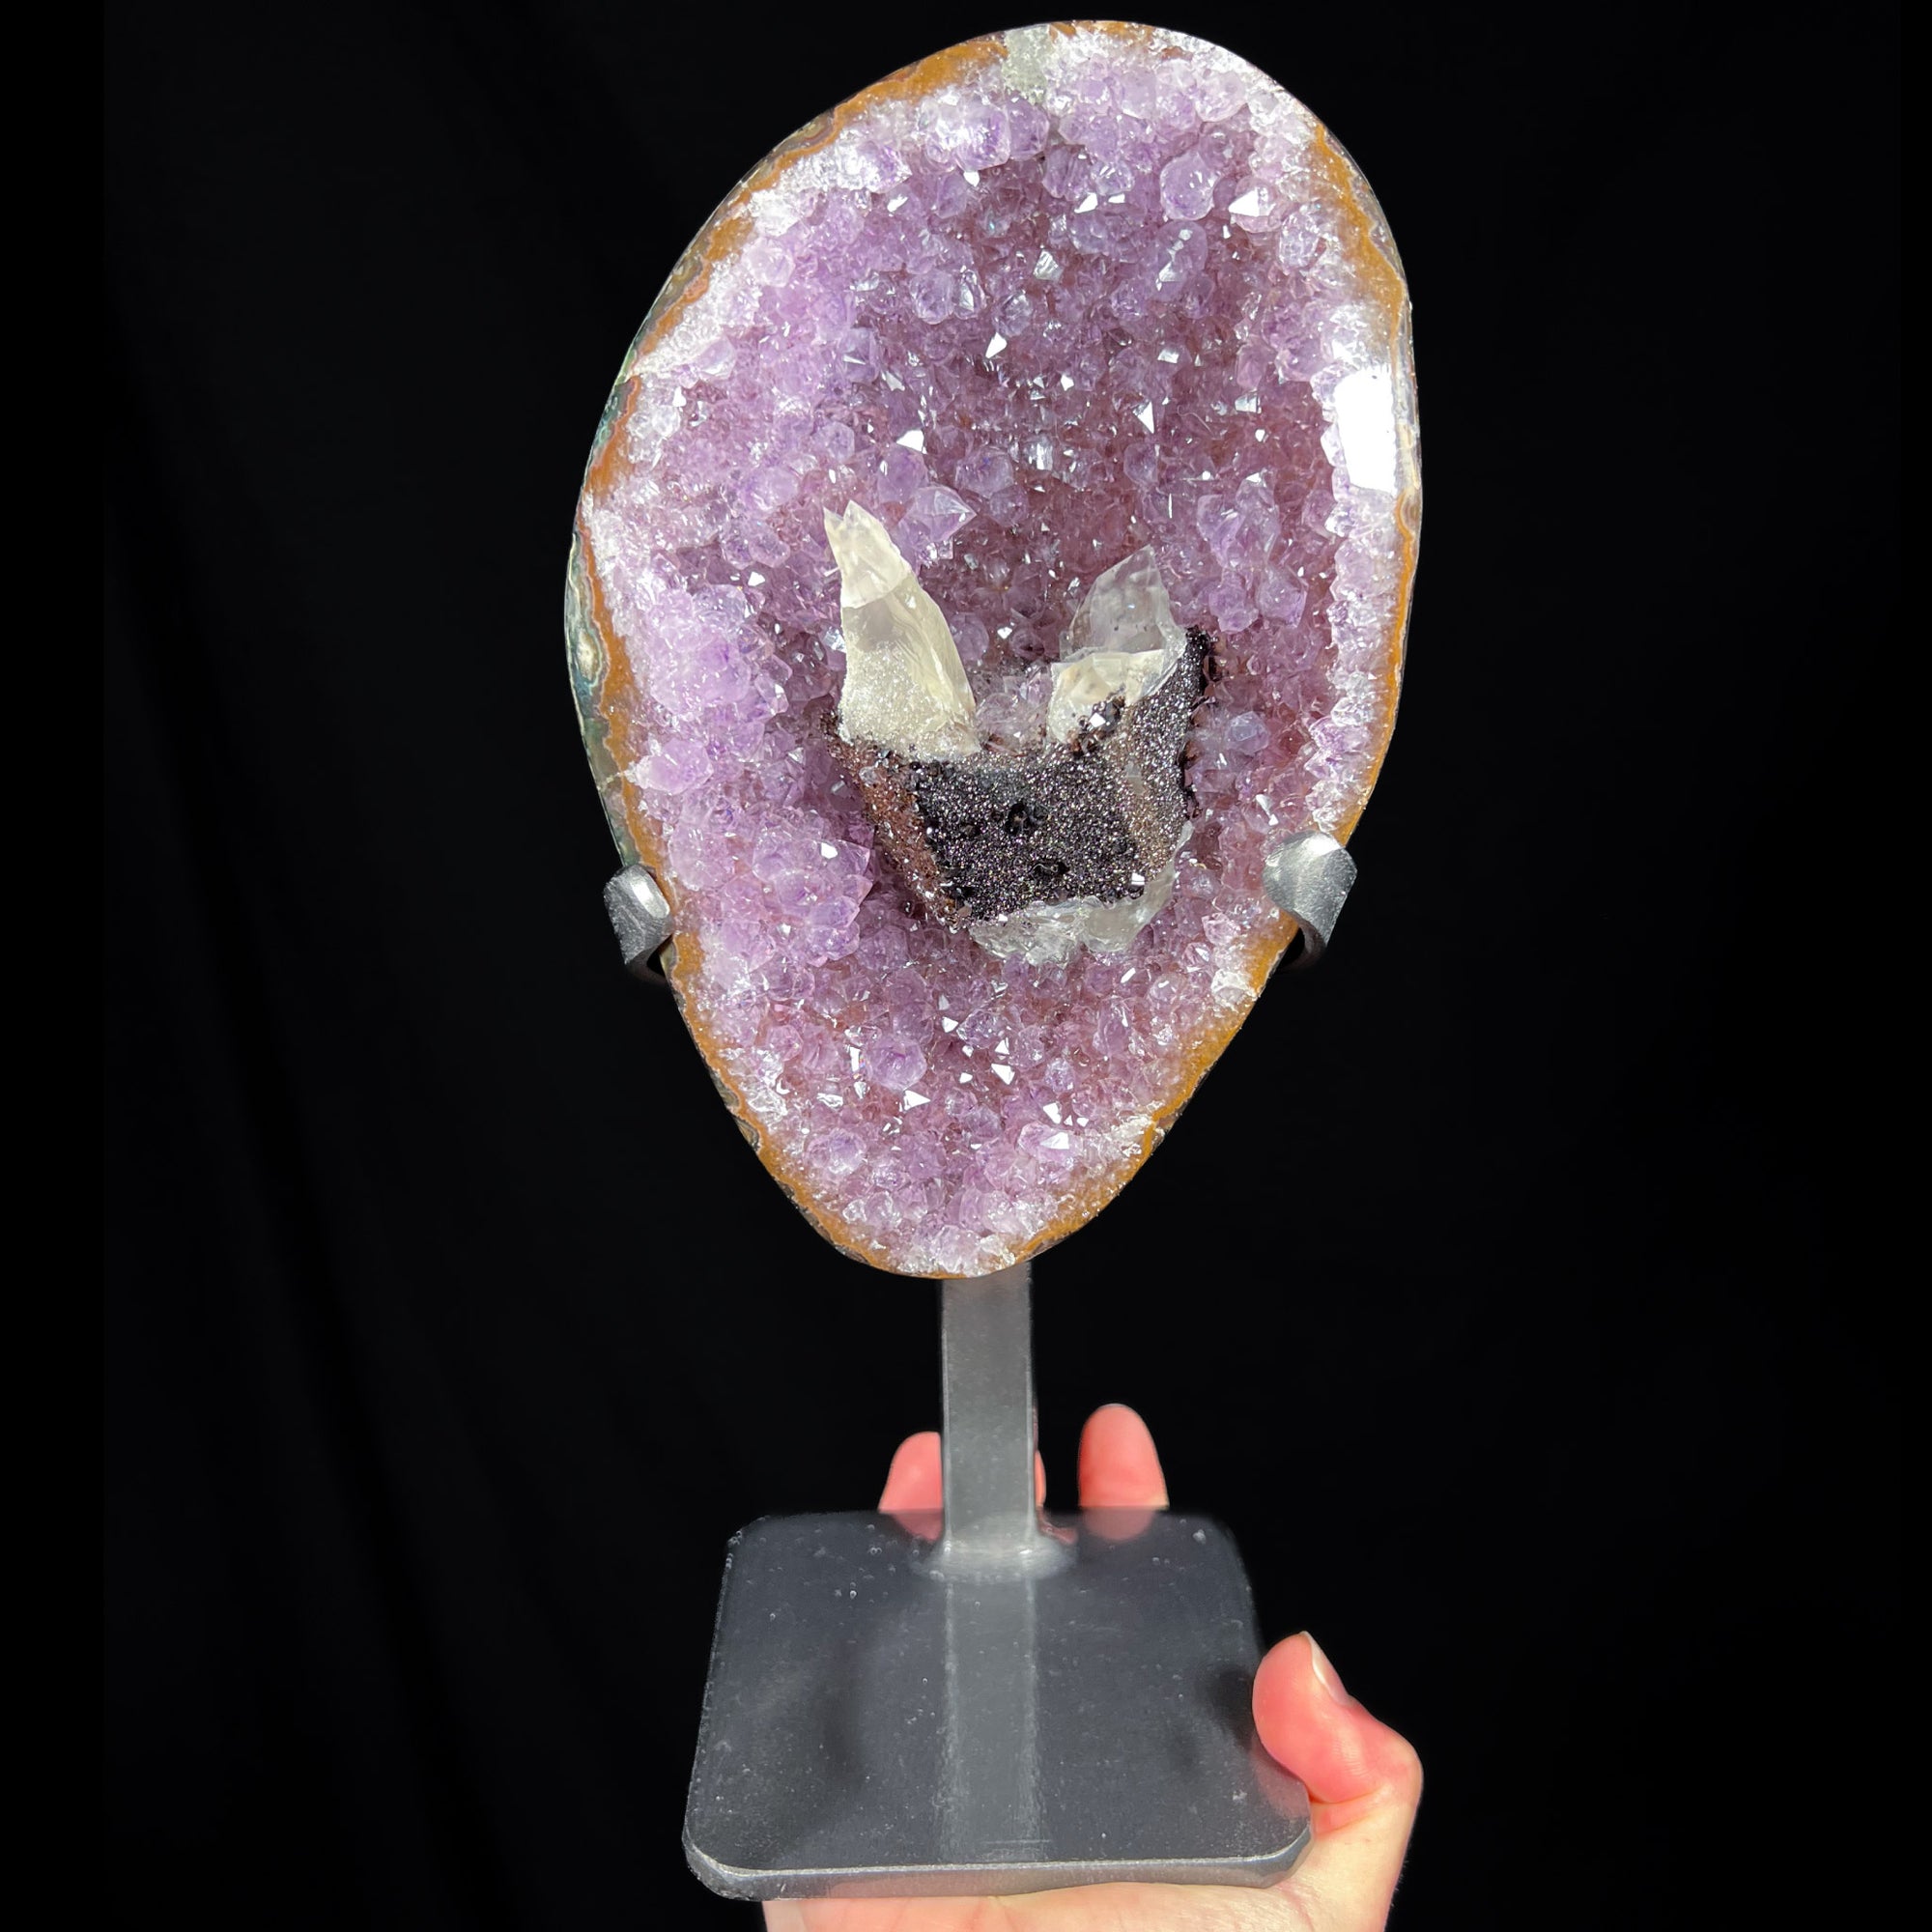 Amethyst Geode with Calcite and Hematite Crystals